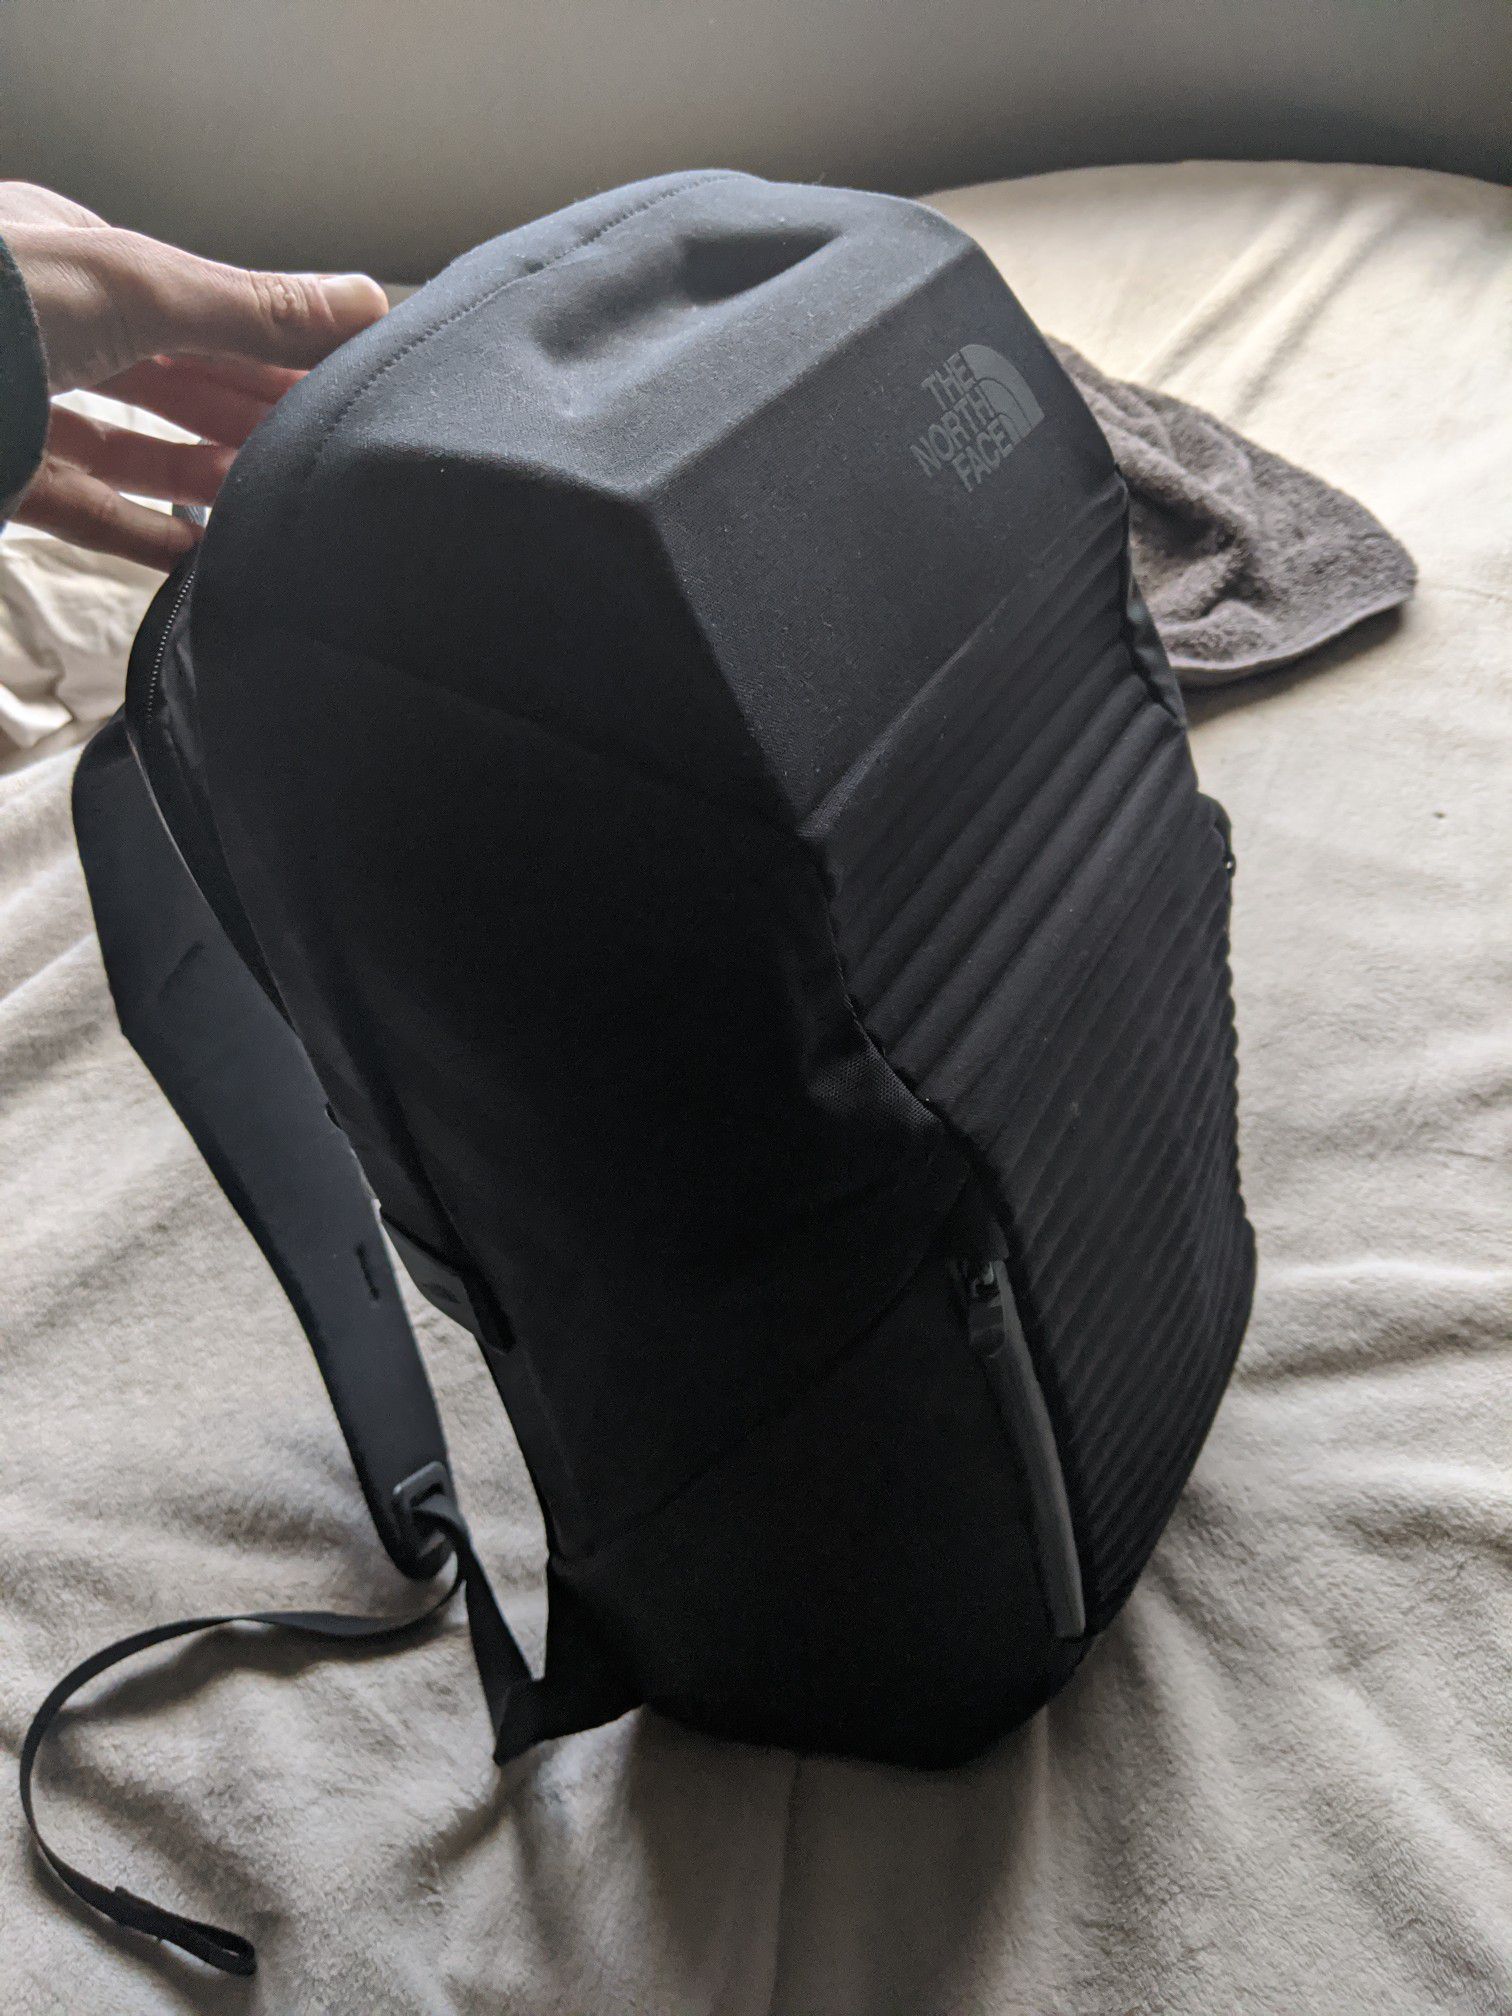 North Face Access 22L Padded Backpack